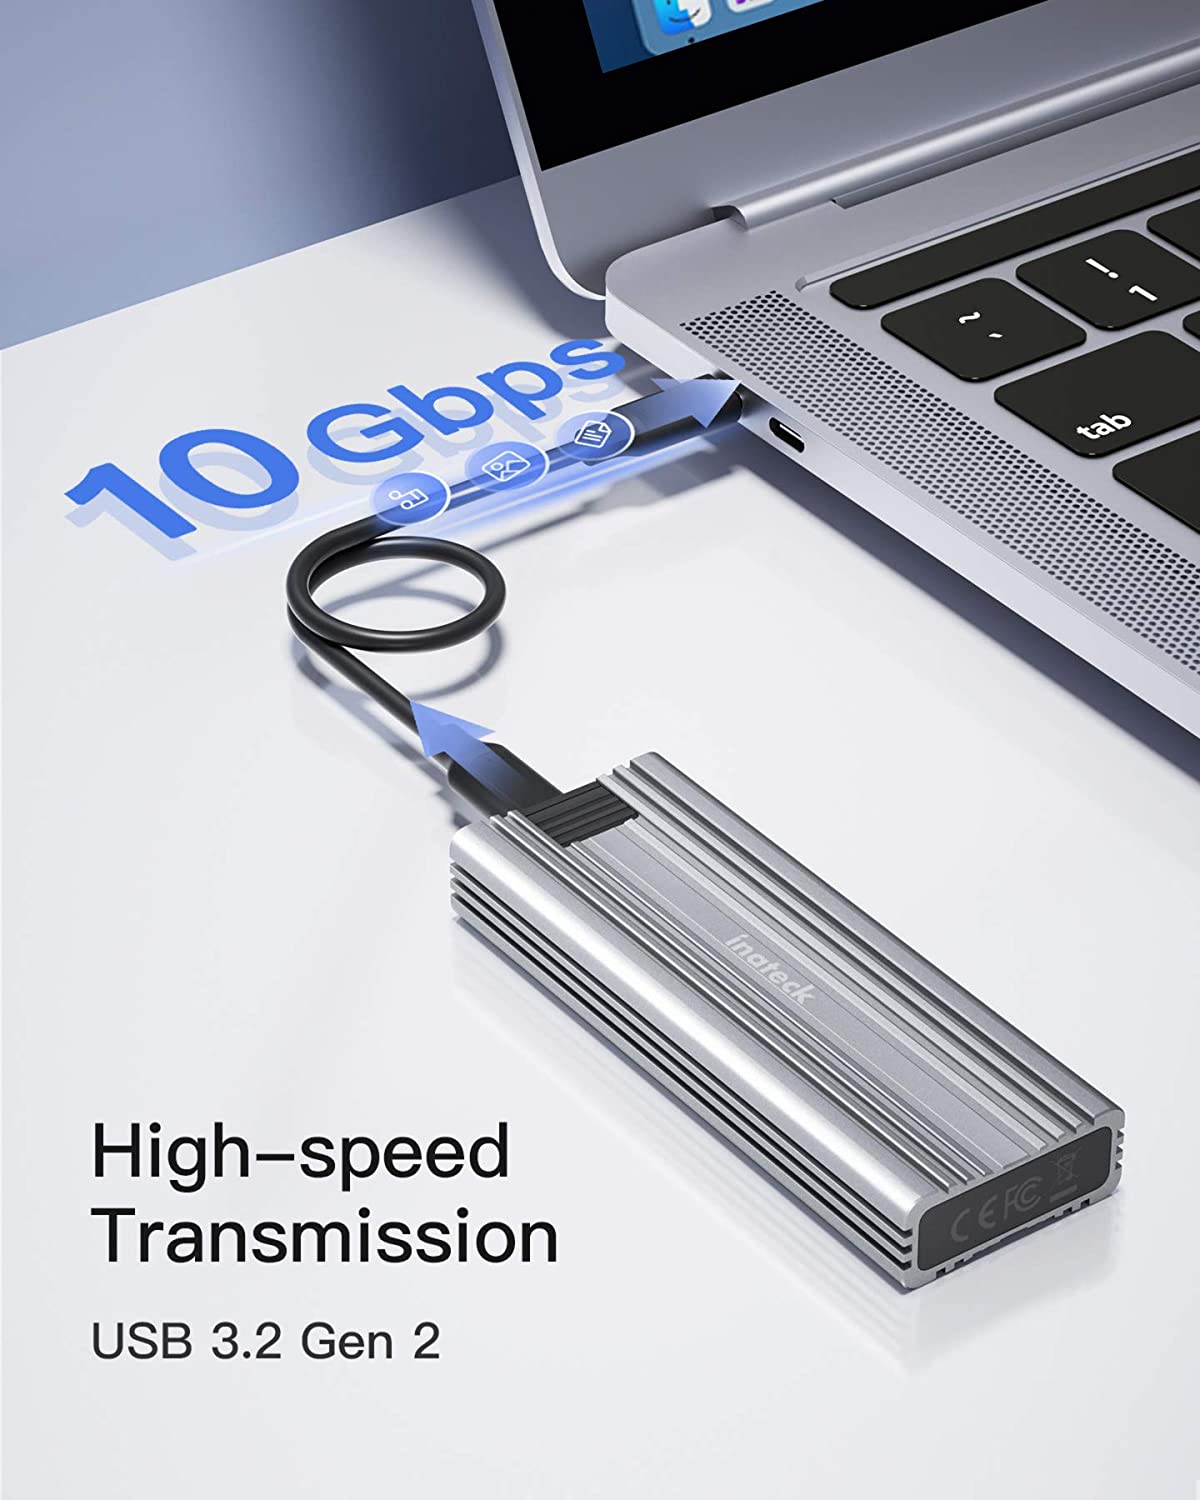 Inateck M.2 SSD ケース、USB A-CとUSB C-Cケーブル付きNVME SSD ケース、FE2025 - Inateckバックパックジャパン